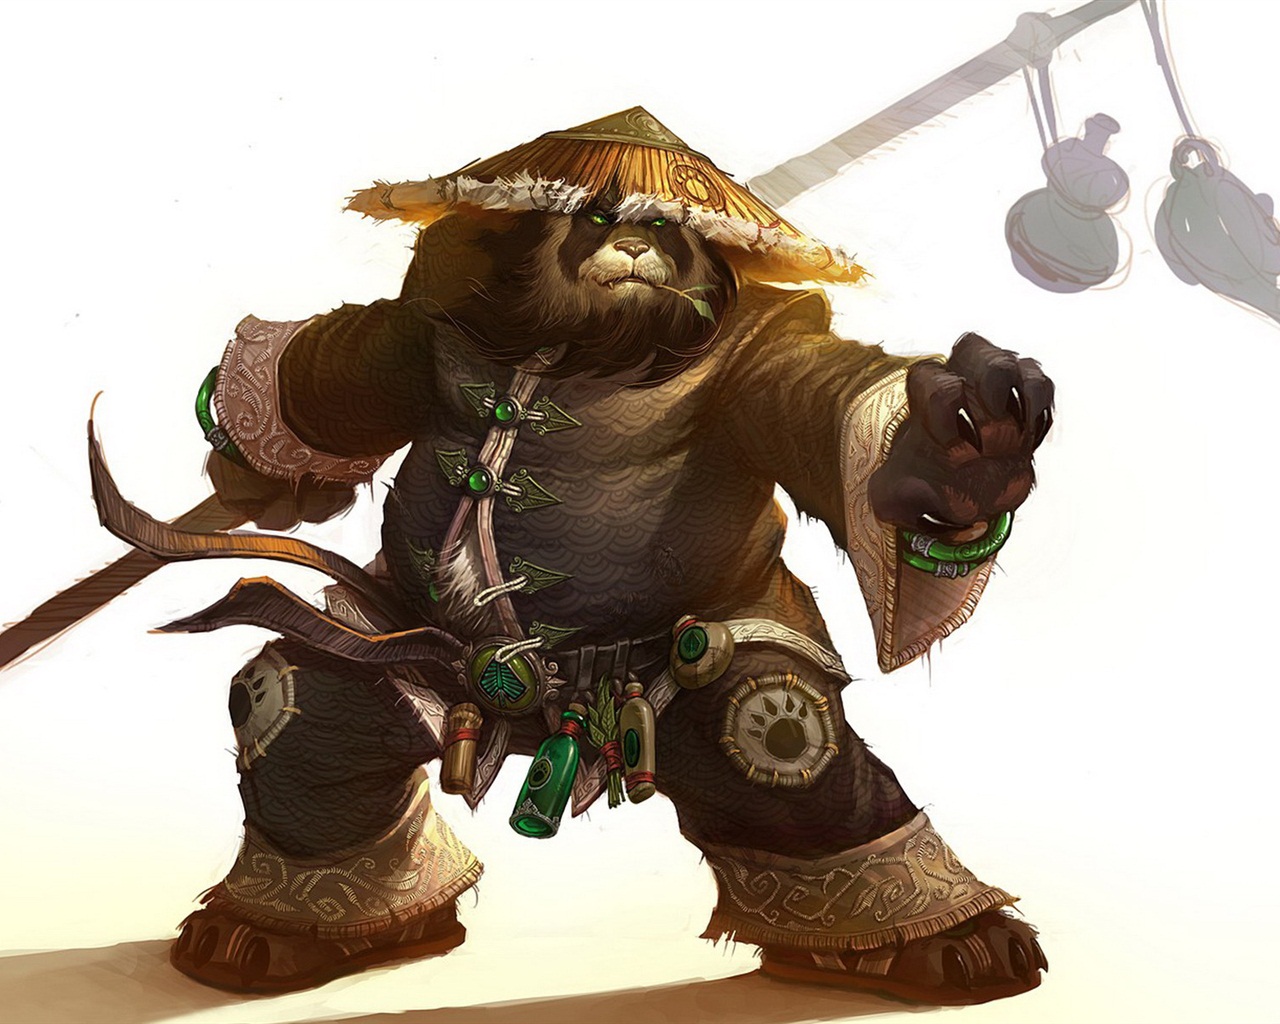 World of Warcraft: Mists of Pandaria HD wallpapers #9 - 1280x1024